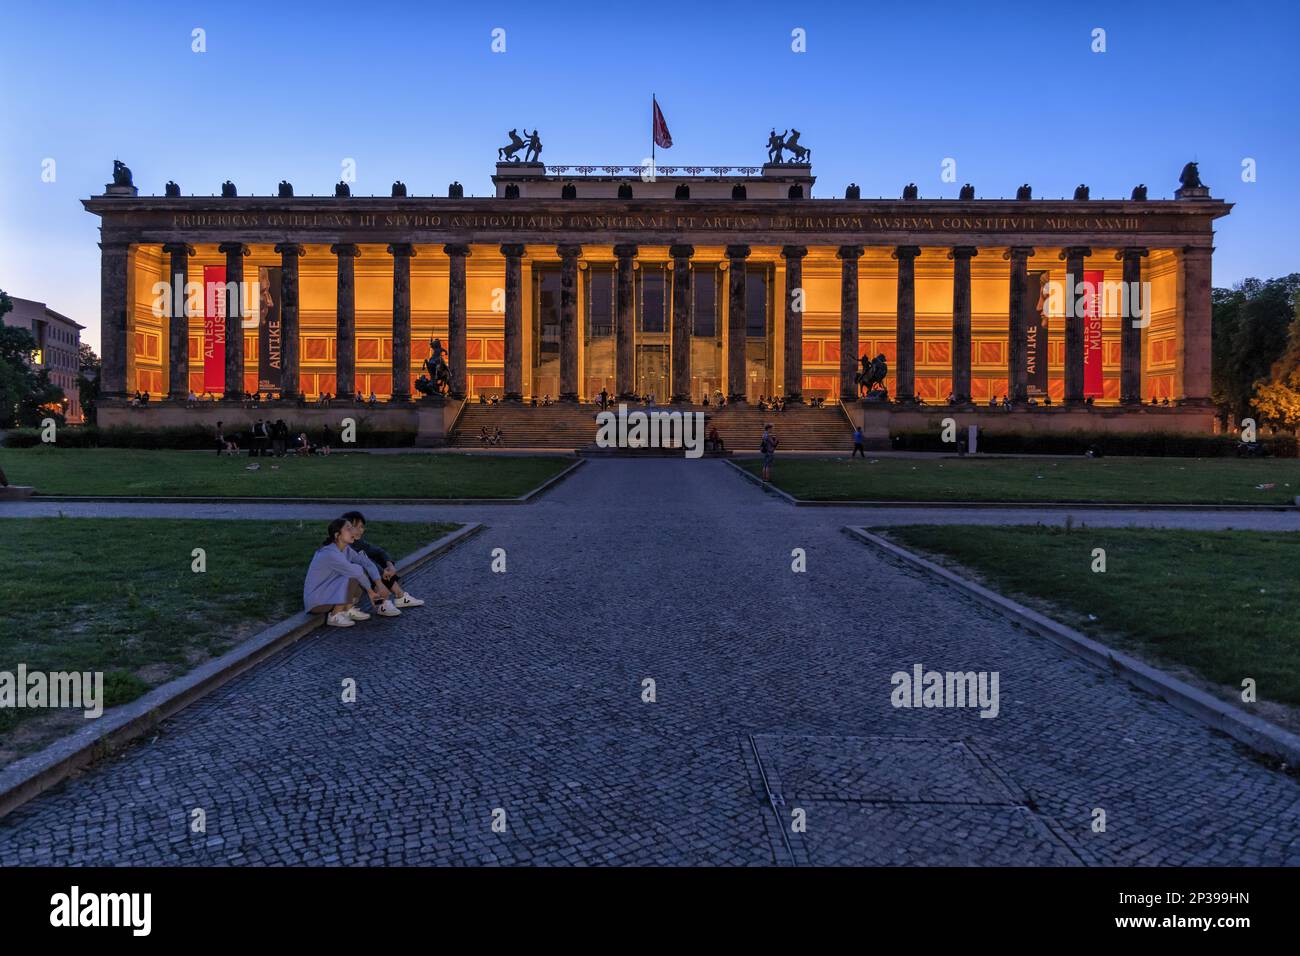 Berlin, Germany, Altes Museum (Old Museum) building illuminated at night on the Museum Island, German Neoclassical style architecture from 1830. Stock Photo